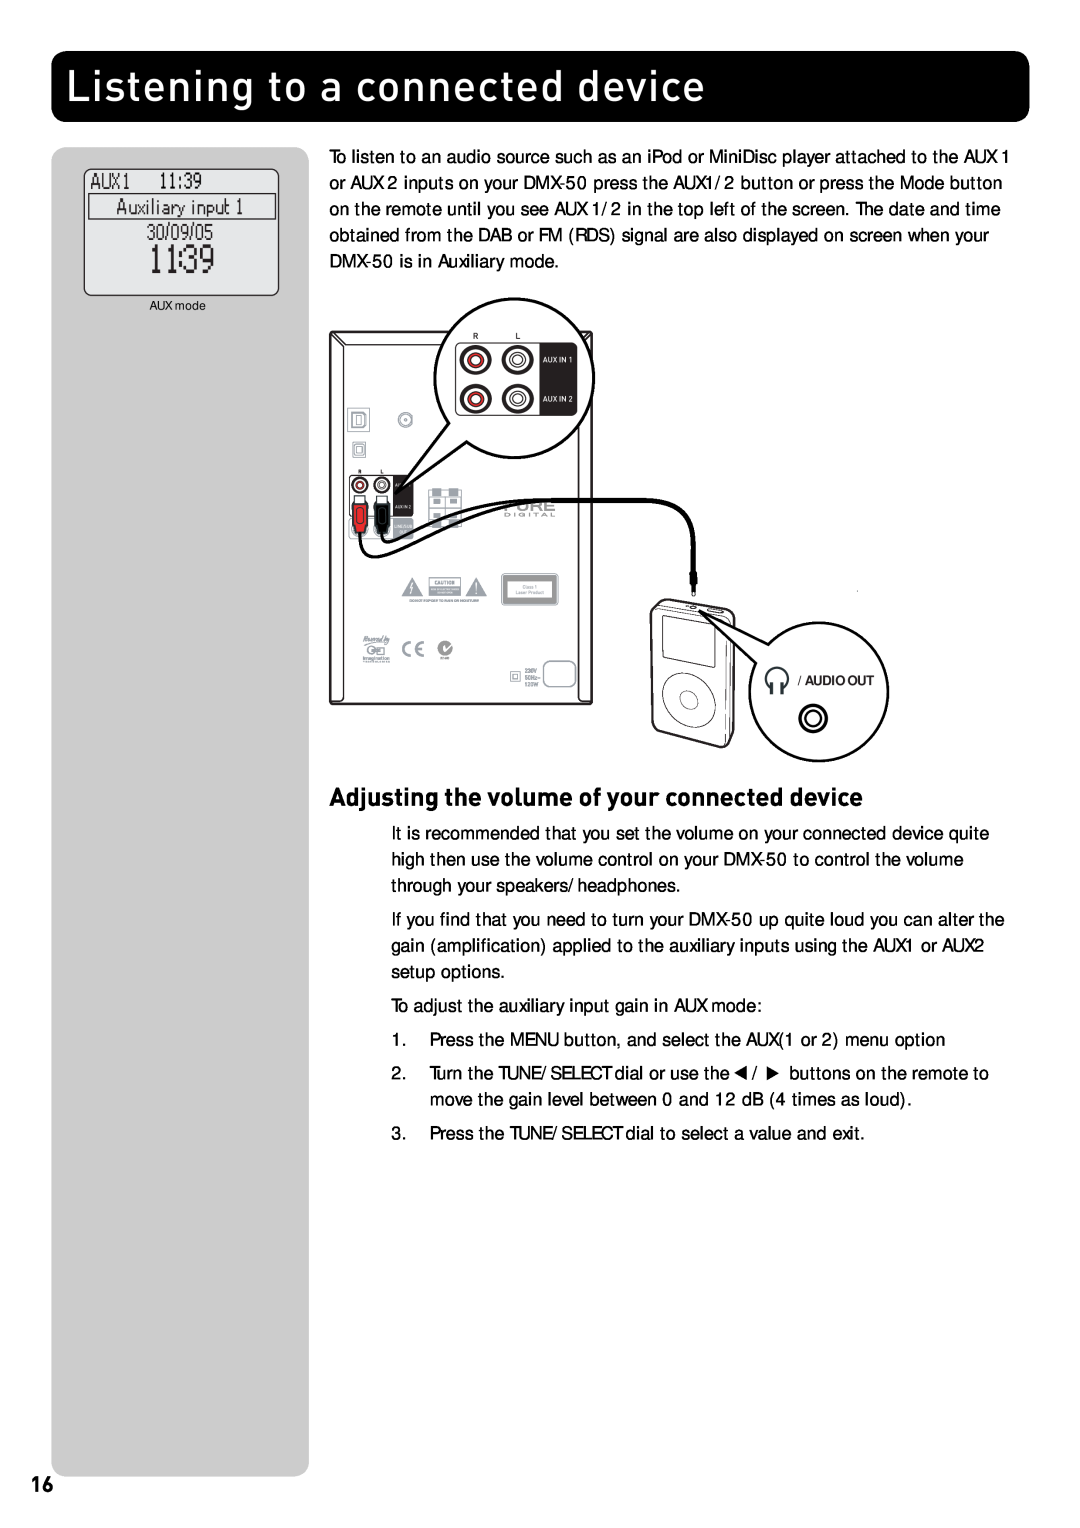 Pure Acoustics DMX-50 owner manual Listening to a connected device, Adjusting the volume of your connected device 